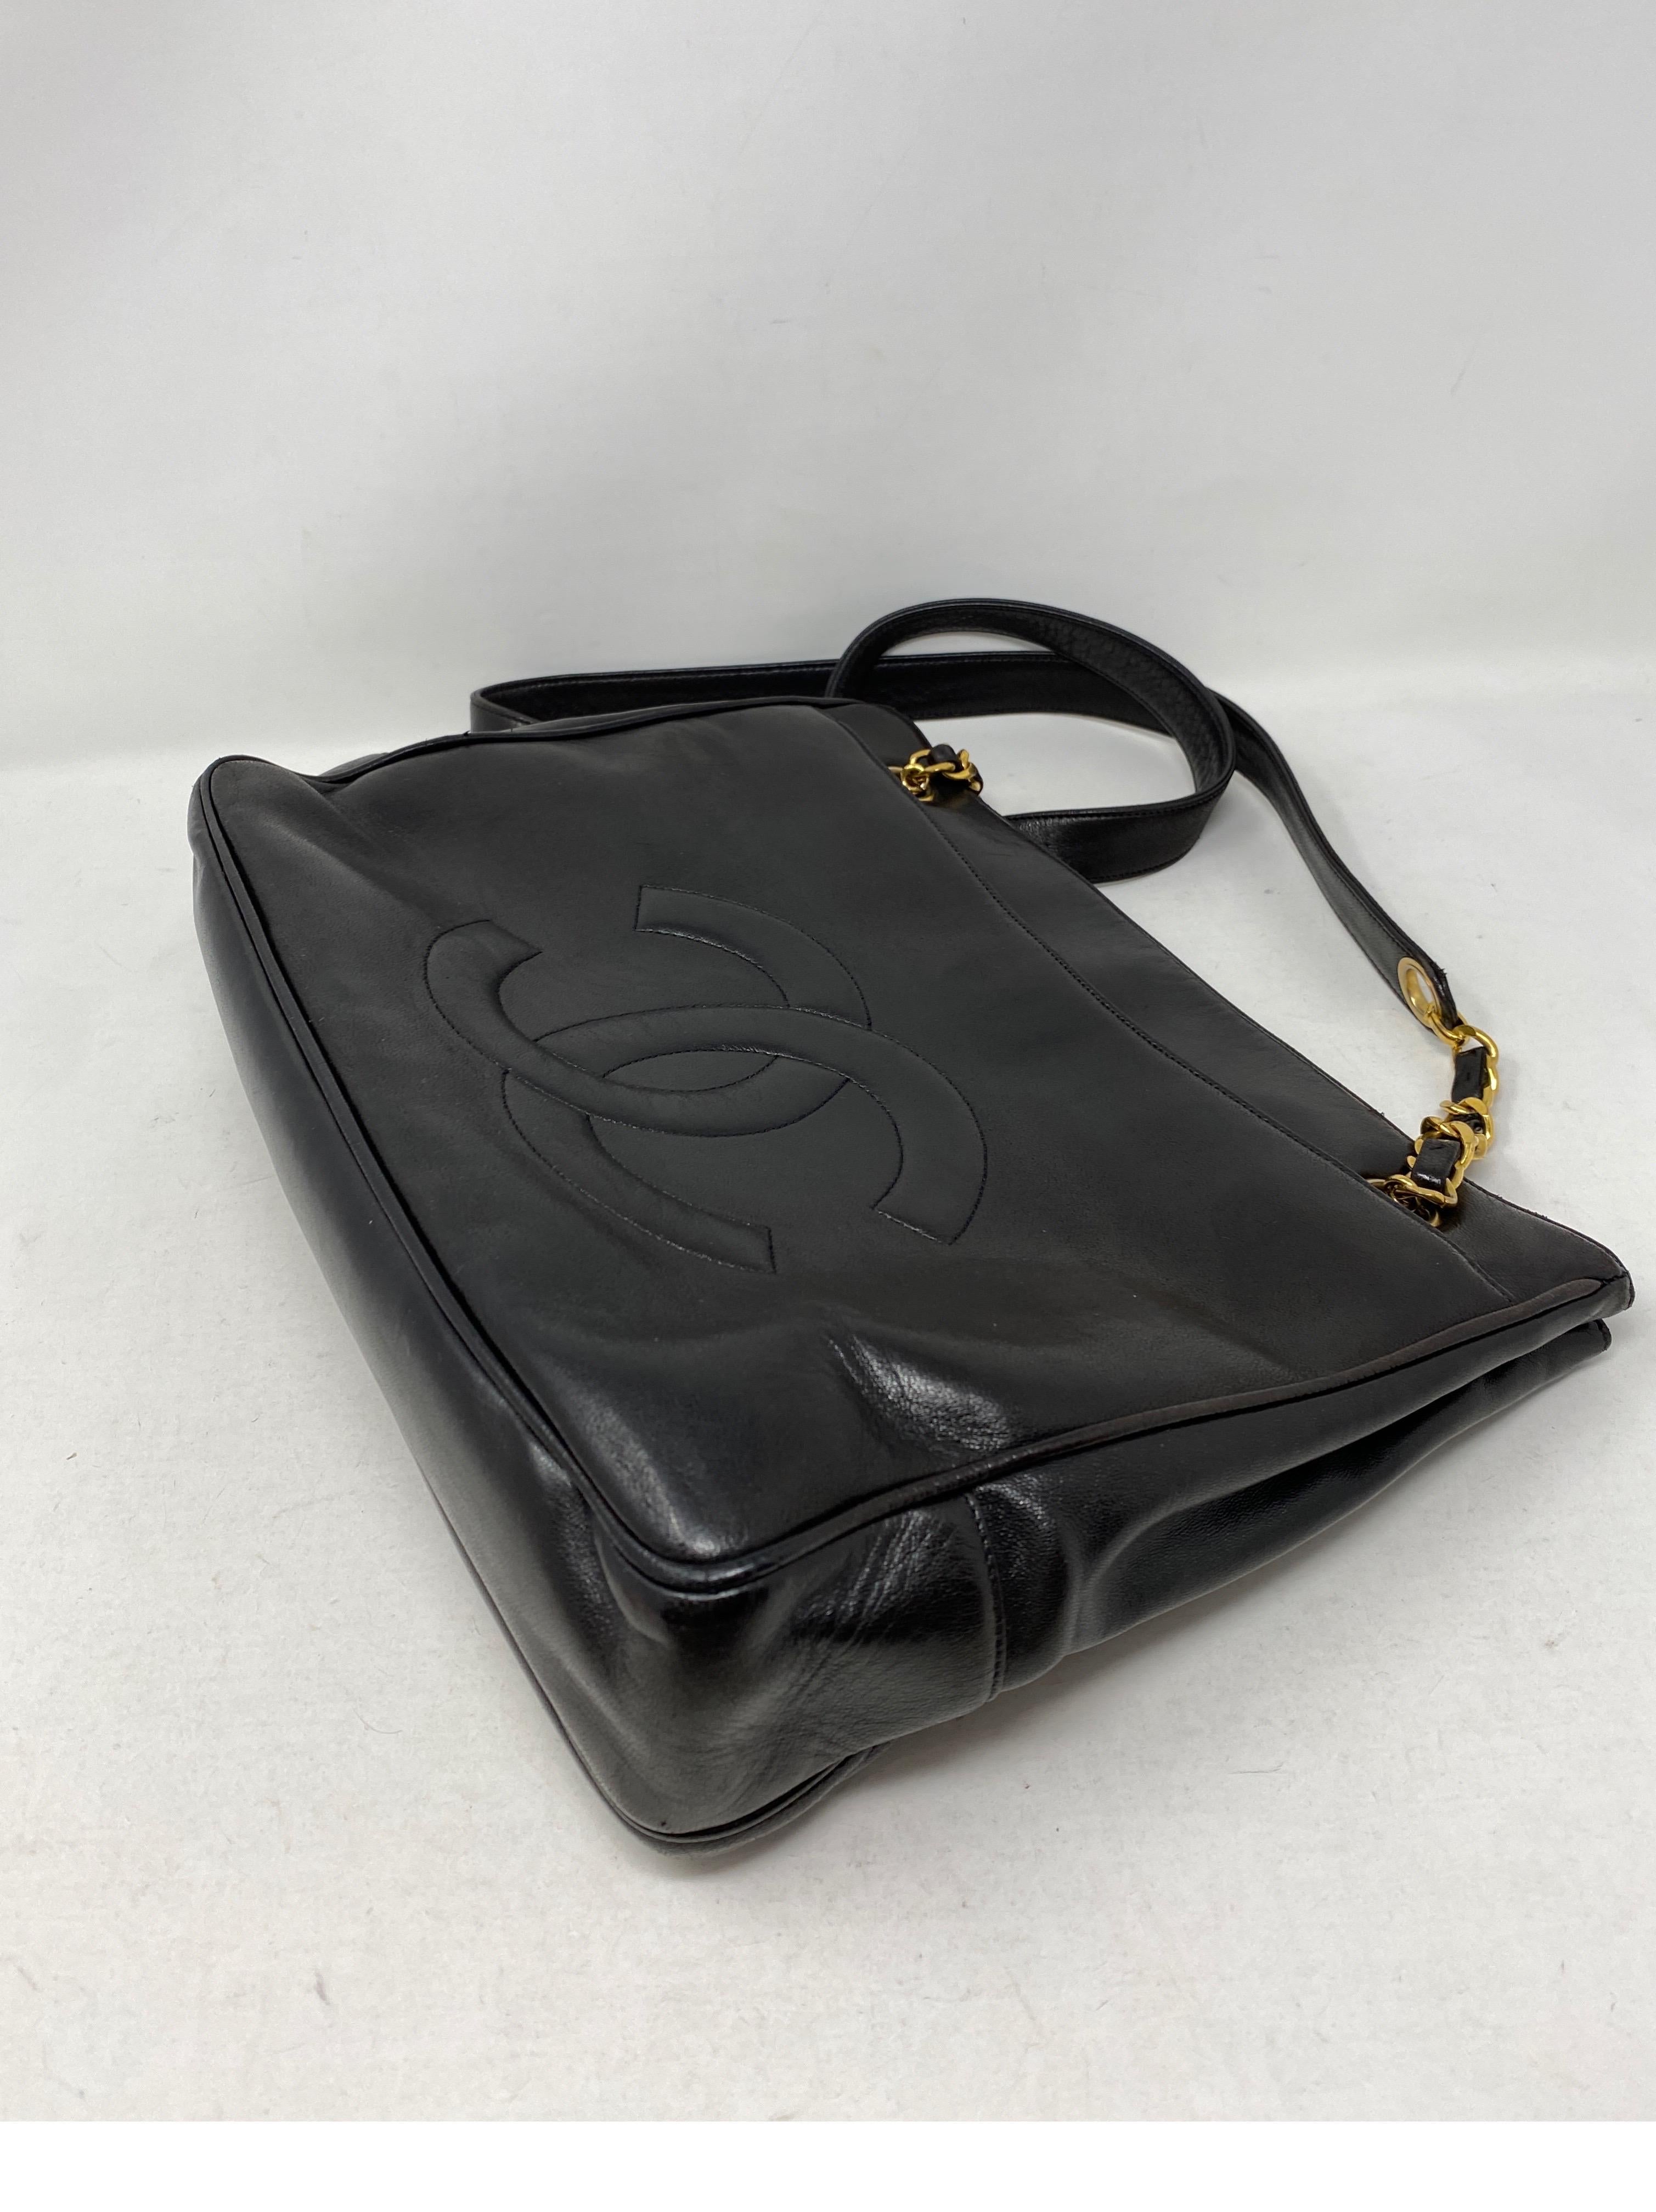 1990s Chanel Black Leather Tote Bag 8